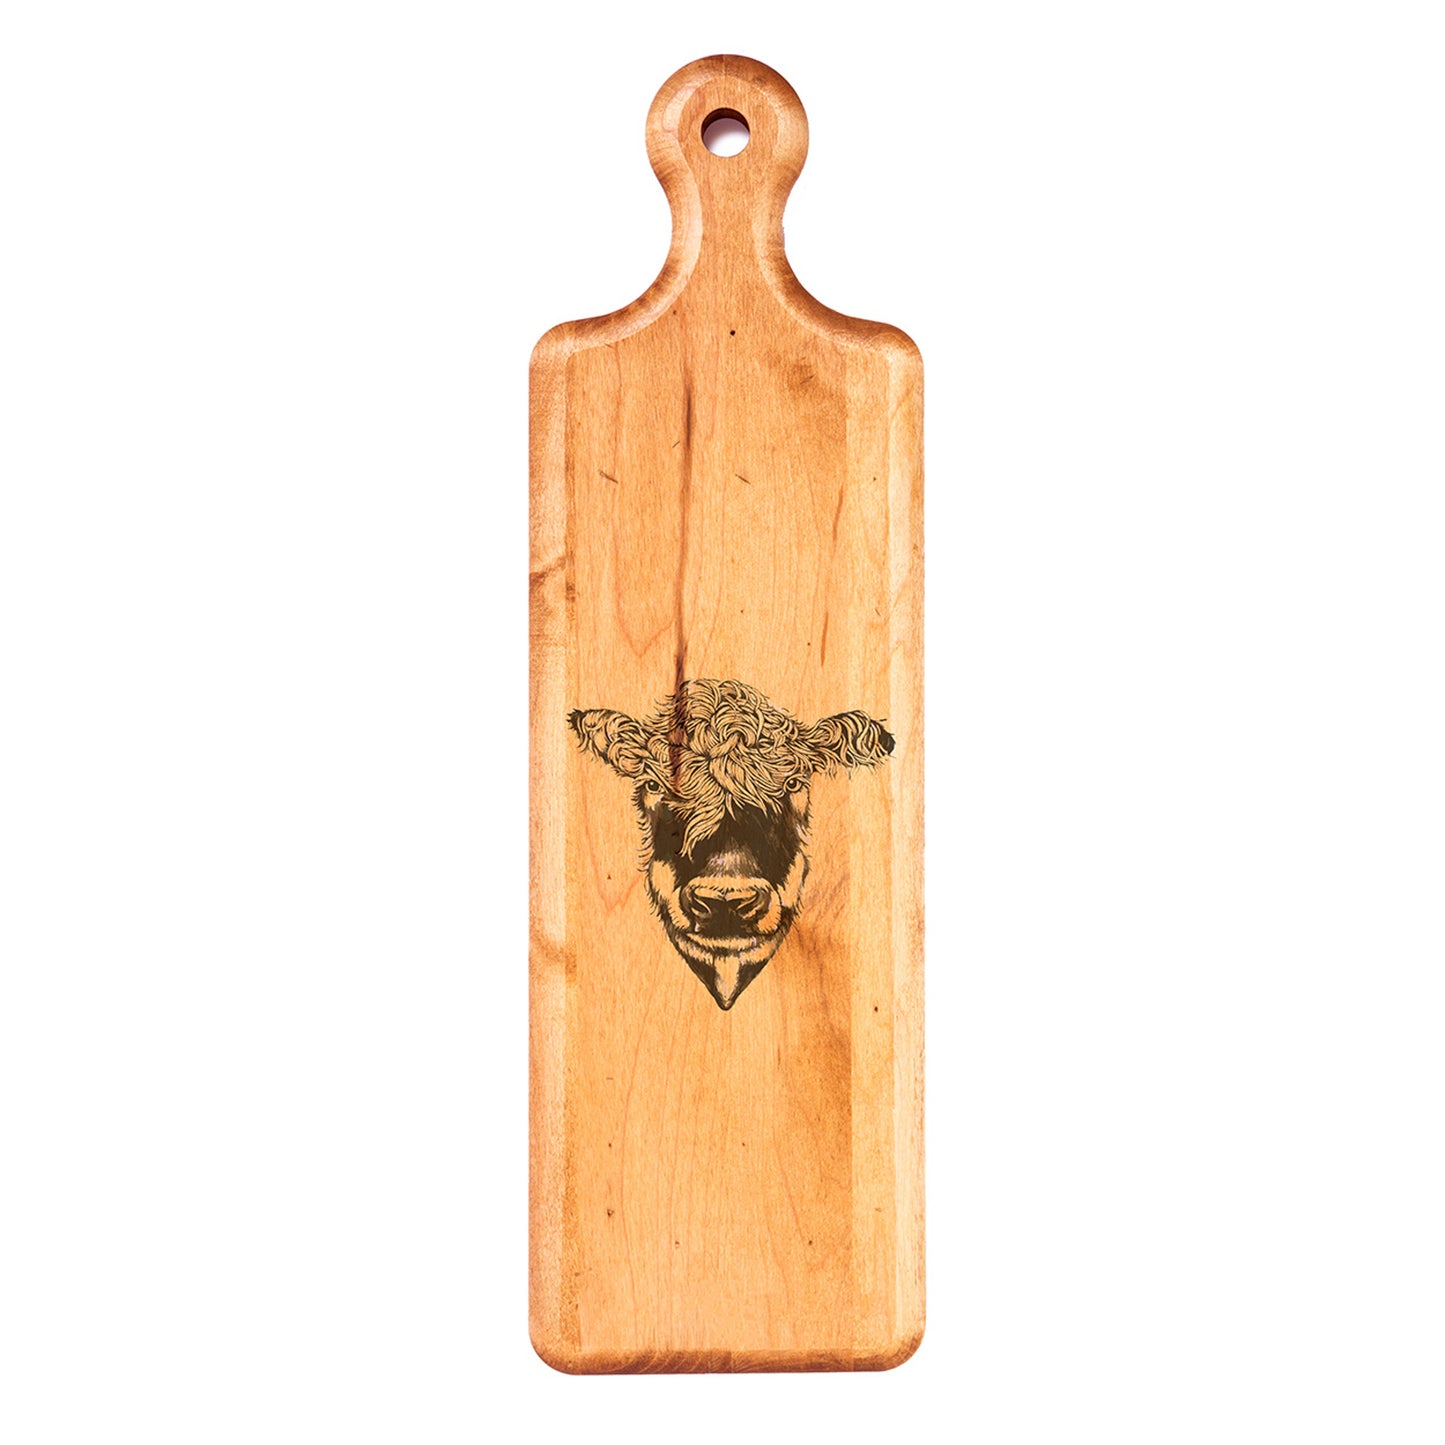 Laura Zindel Maple Artisan Plank Serving Board - More designs available